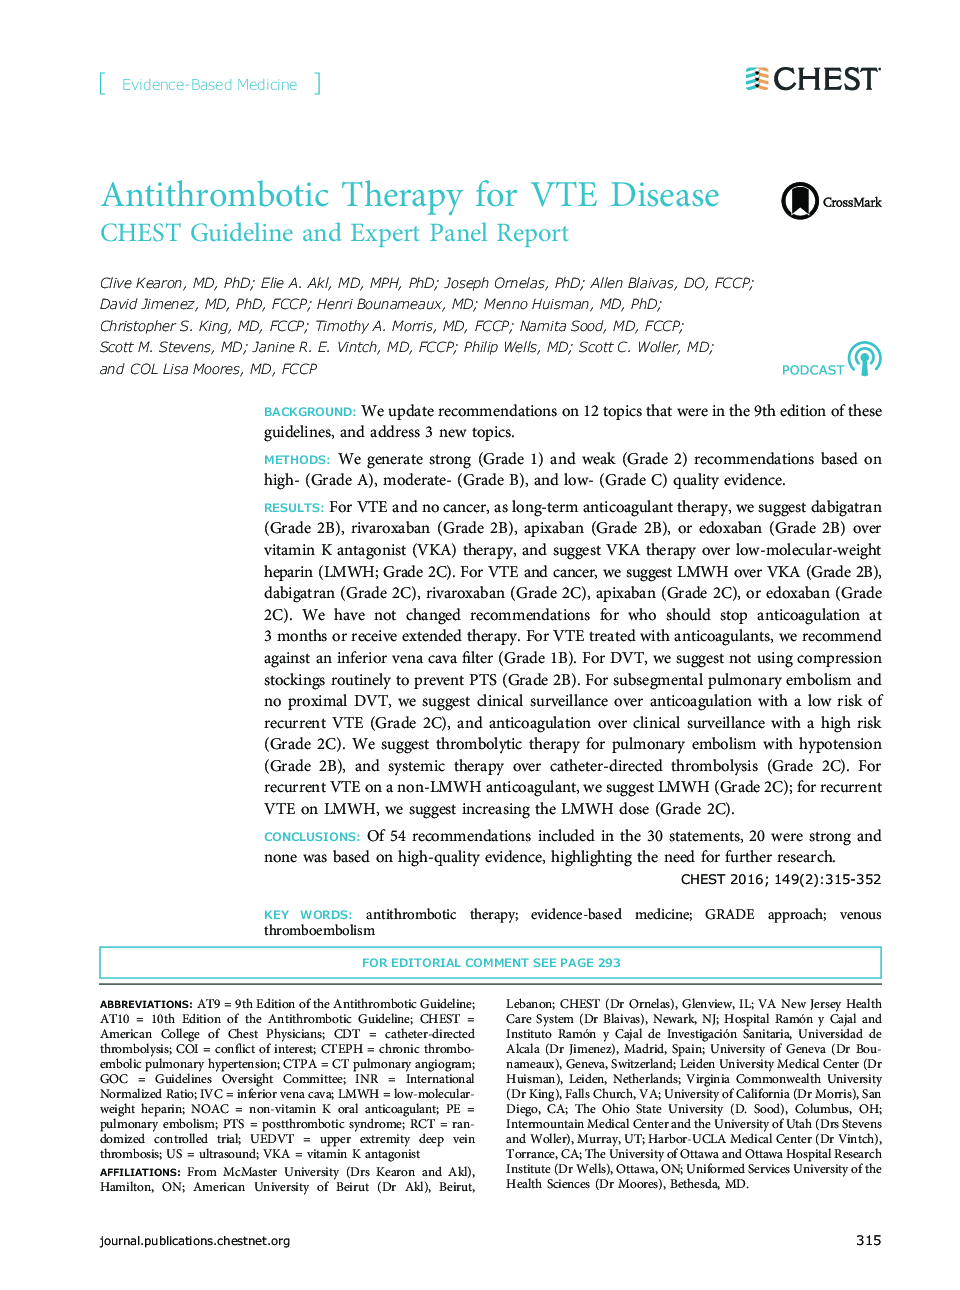 Antithrombotic Therapy for VTE Disease: CHEST Guideline and Expert Panel Report